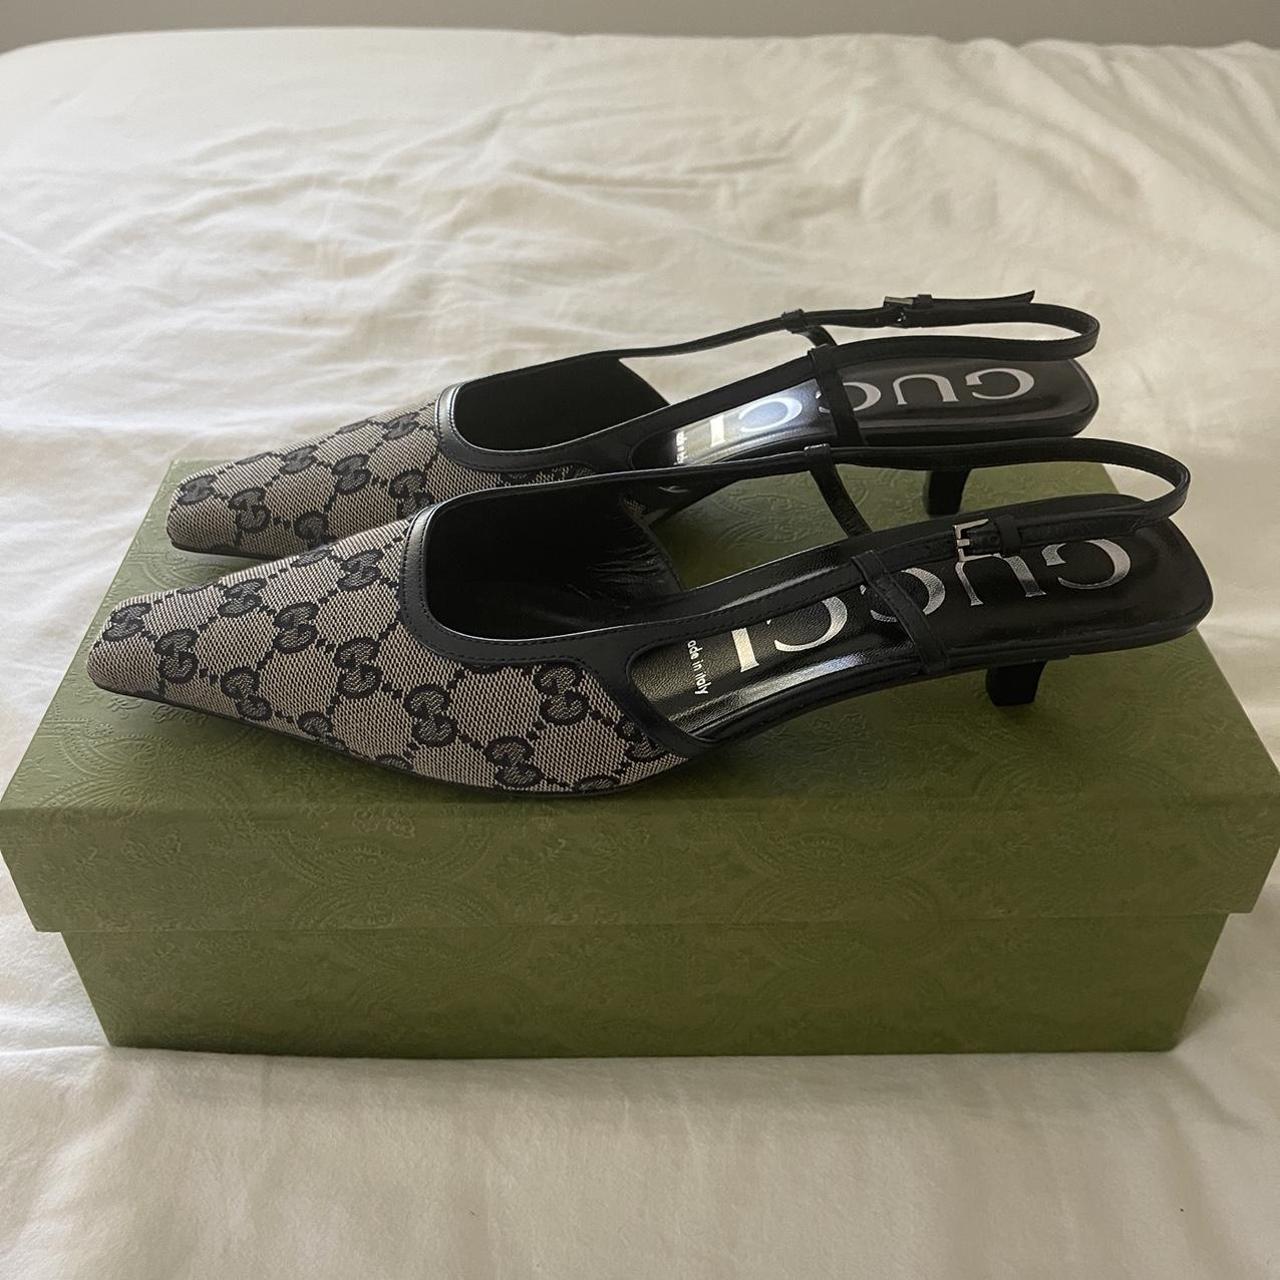 brand new never worn 100% authentic gucci x - Depop